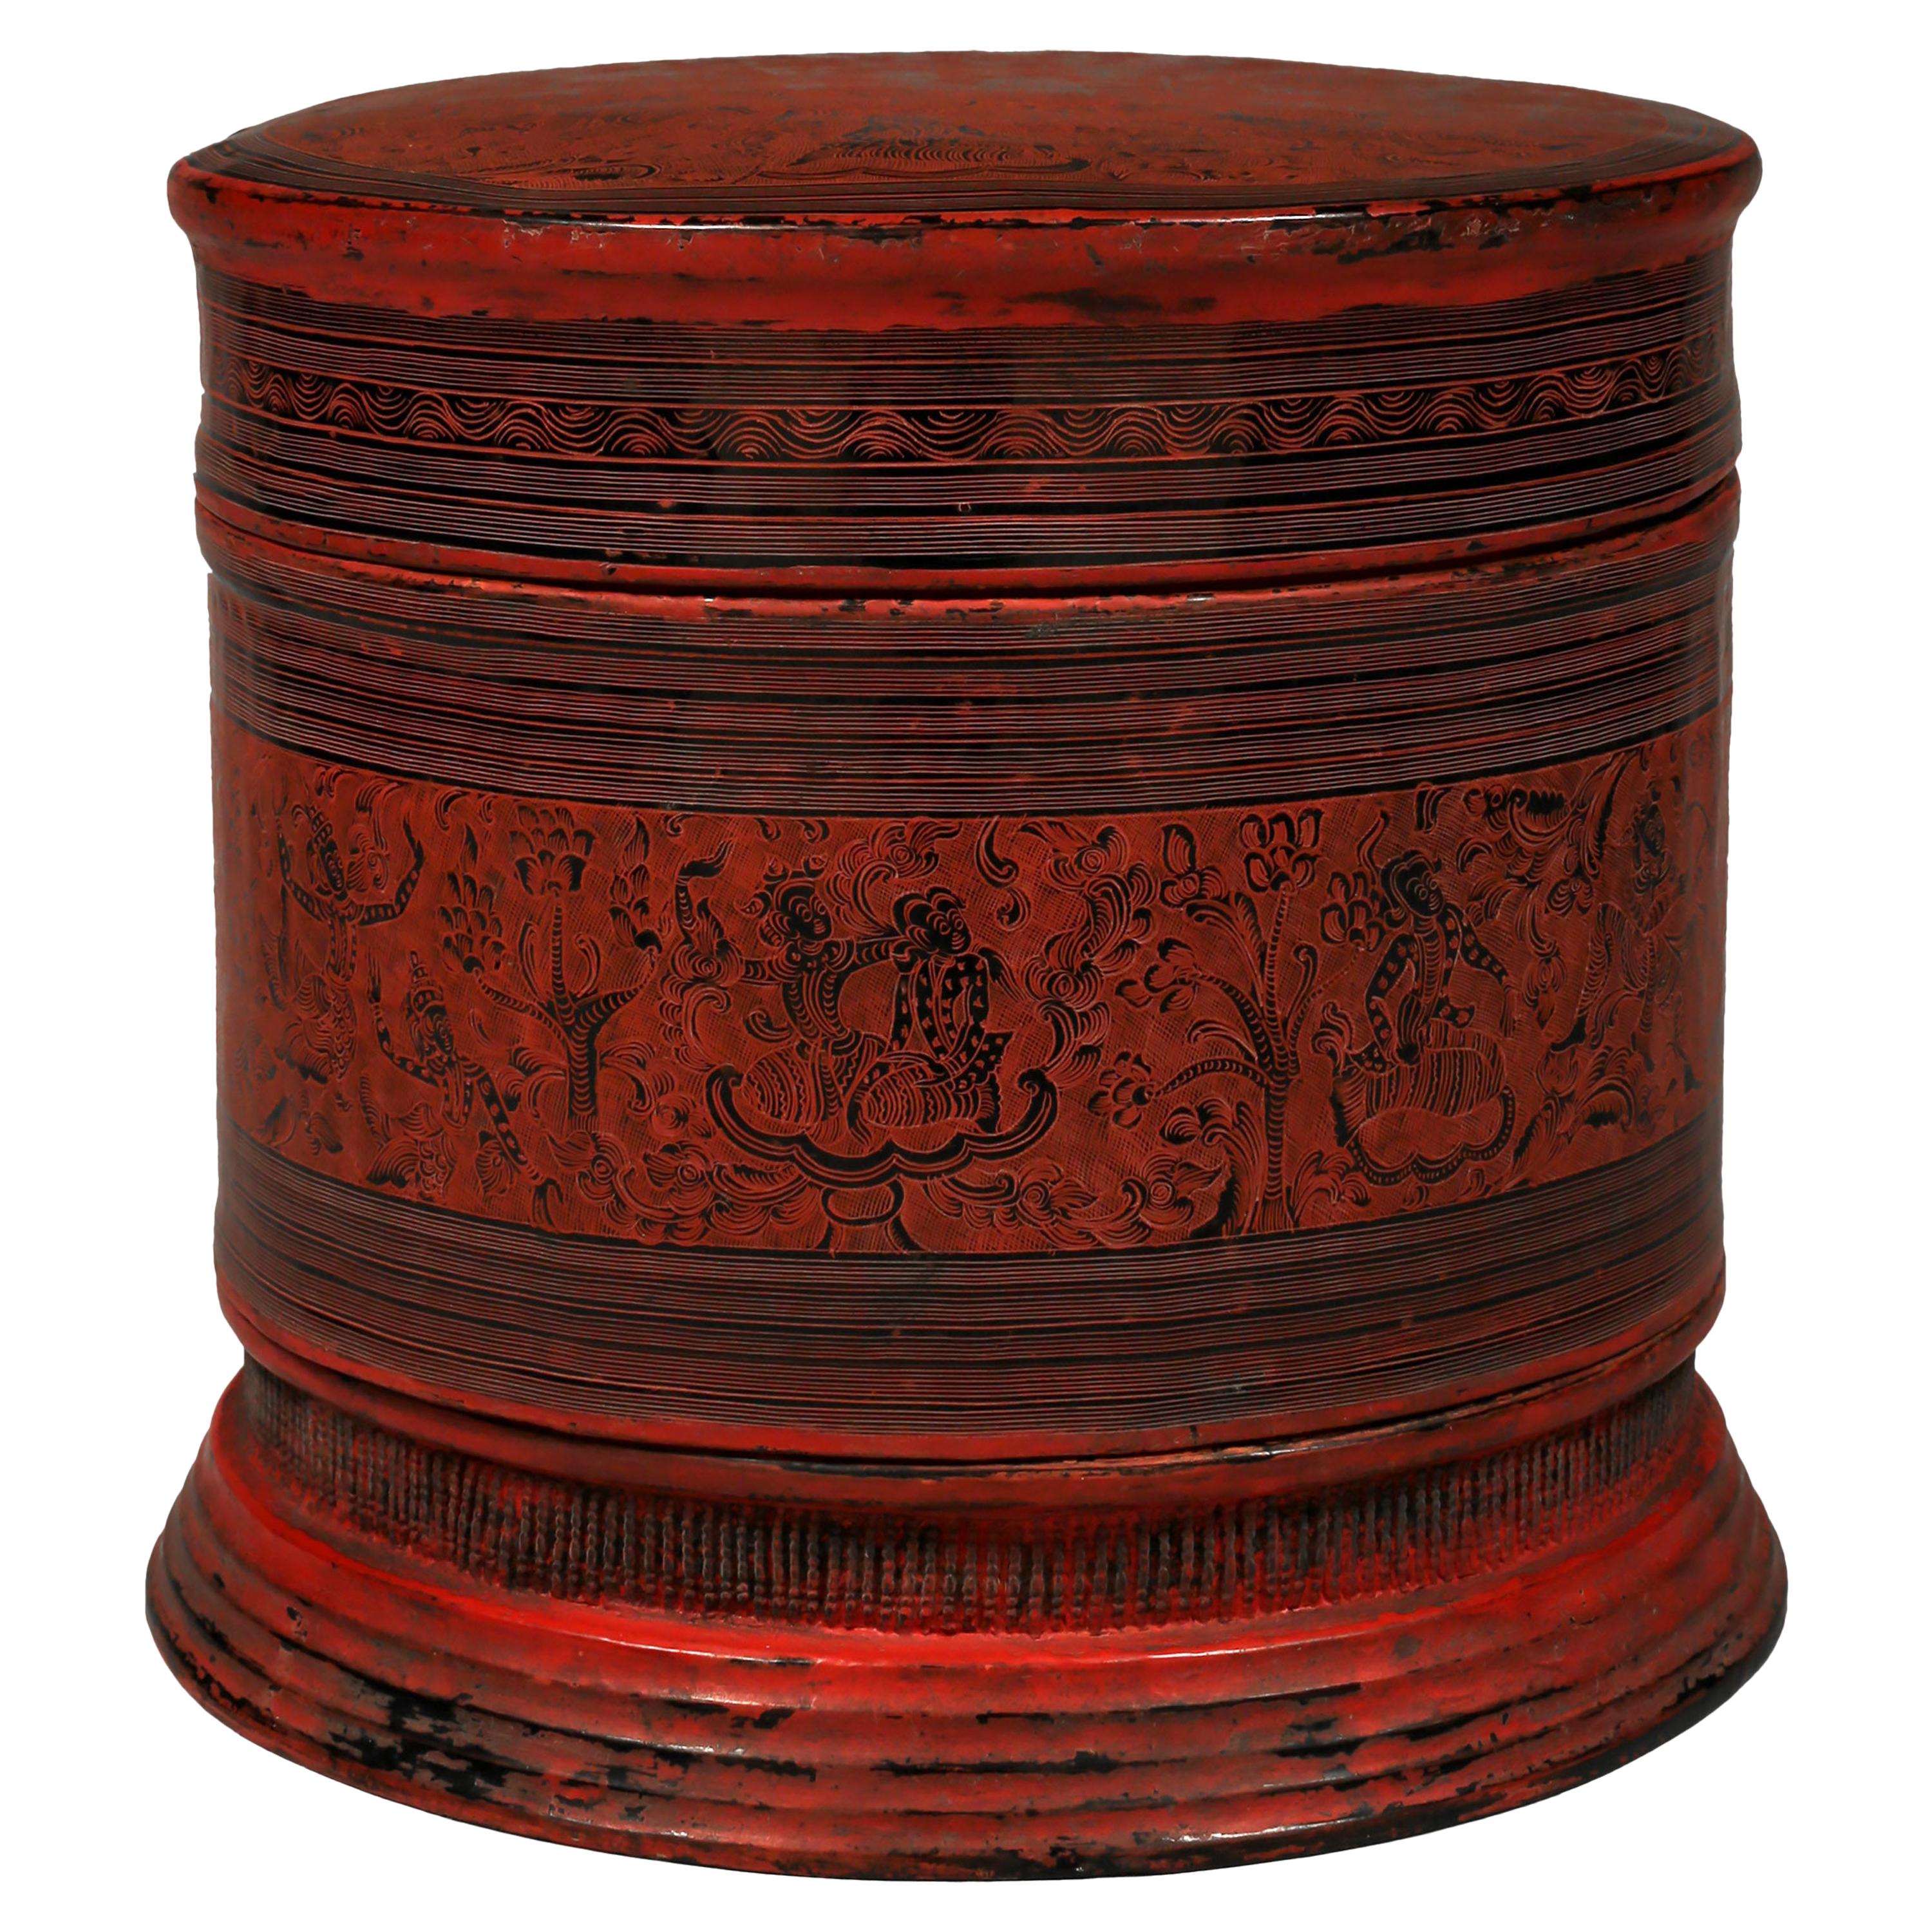 Late 19th-Early 20th Century Lacquered Wood Betel Box, Burma